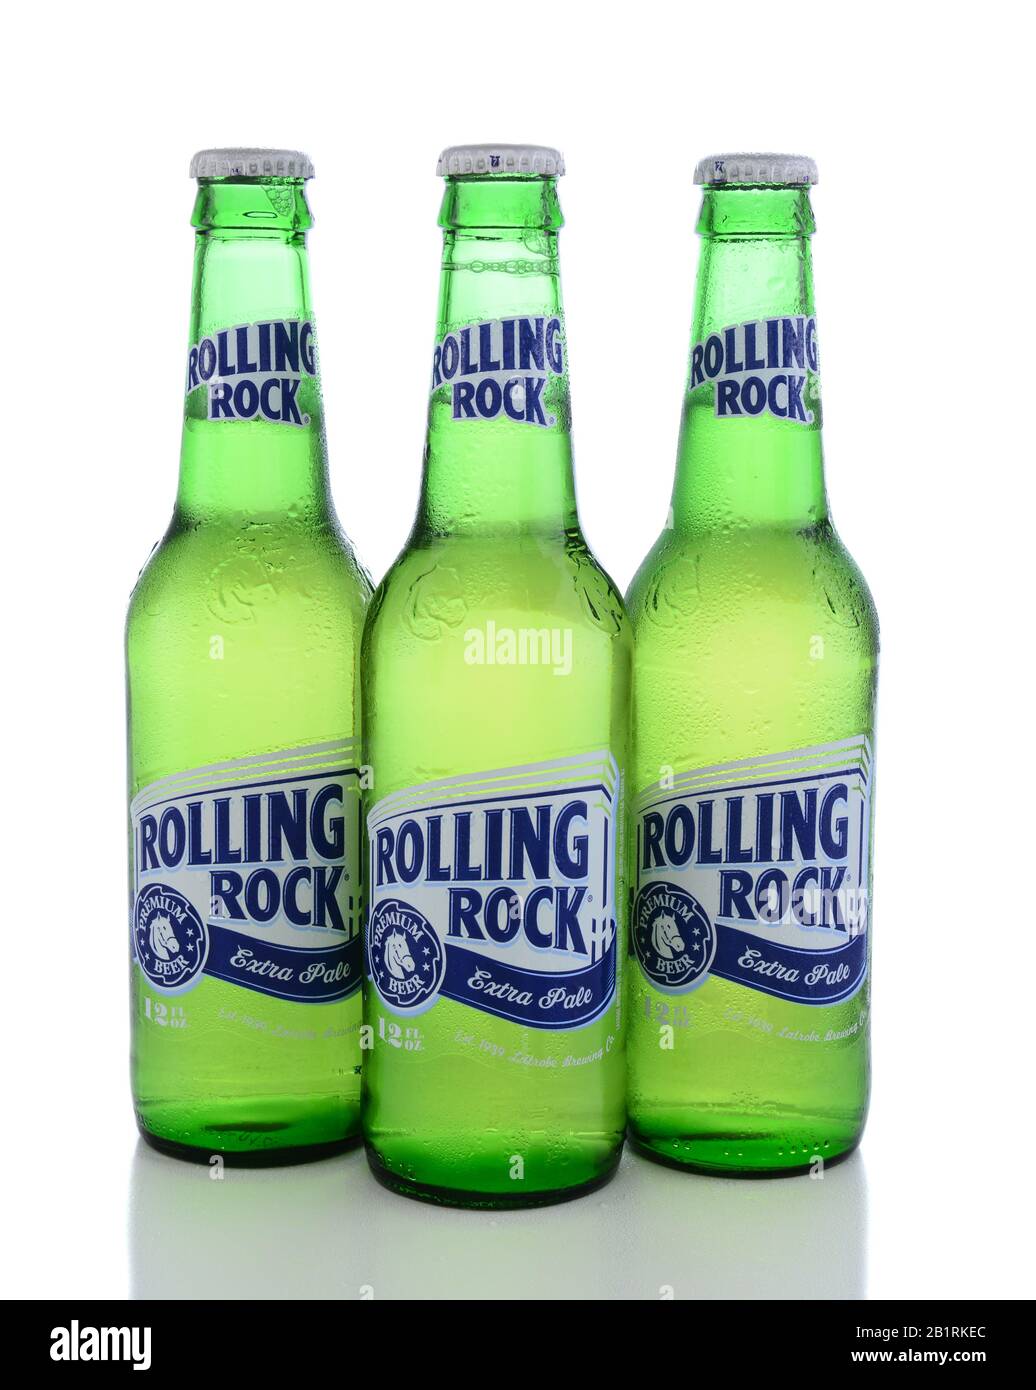 IRVINE, CA - JUNE 14, 2015: Rolling Rock Extra Pale Beer. Three bottles of the American beer founded in 1939 in Latrobe, Pennsylvania, by the Latrobe Stock Photo